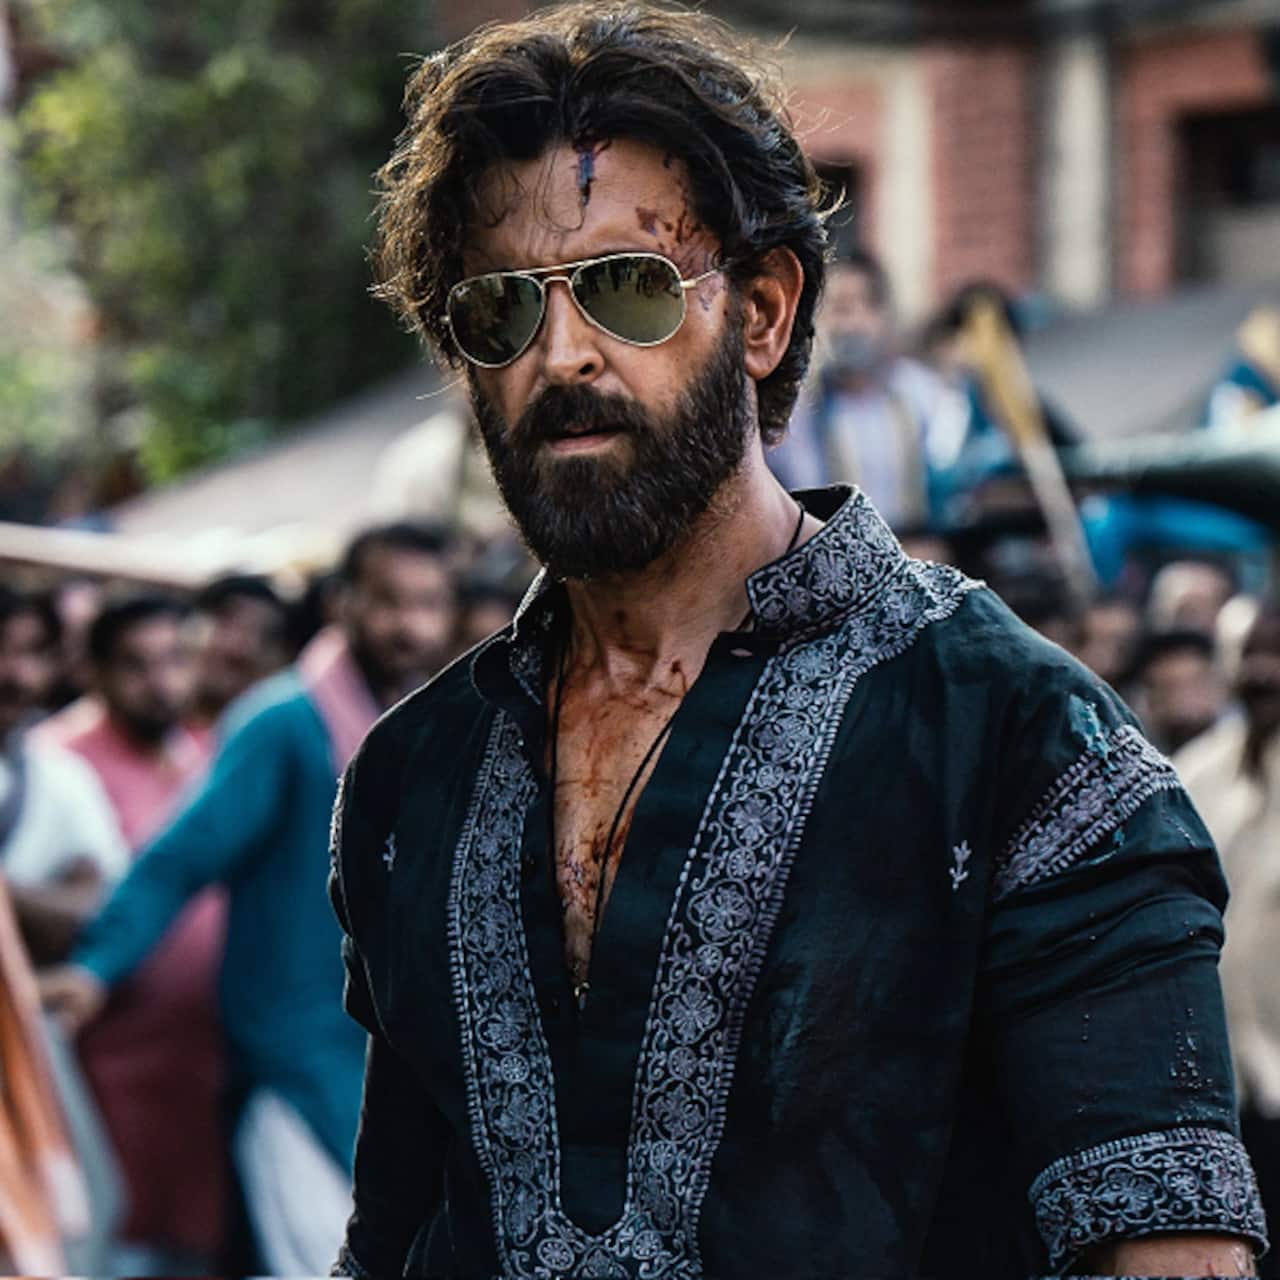 Hrithik Roshan's post on brain focusing on 'NEGATIVE' after Vikram Vedha box office failure leaves fans wondering and worried